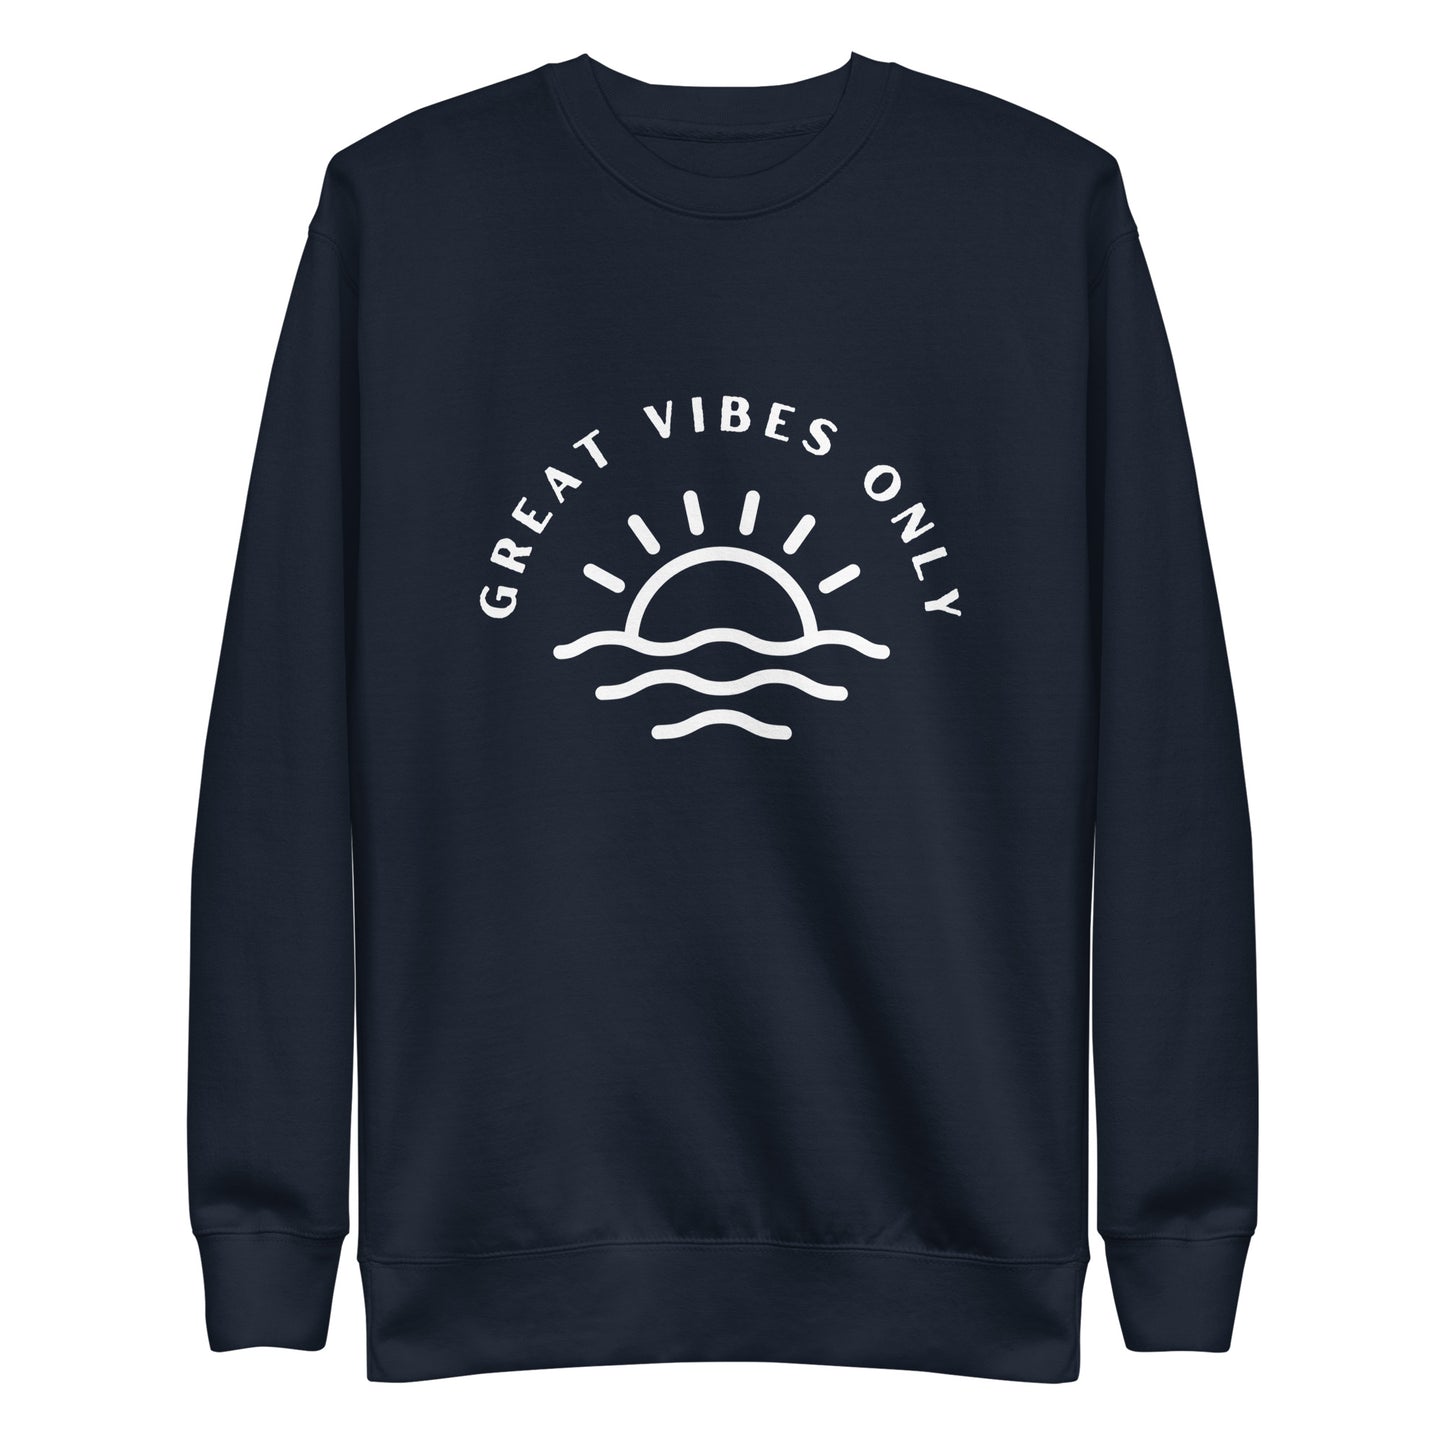 Great Vibes Only Sweatshirt